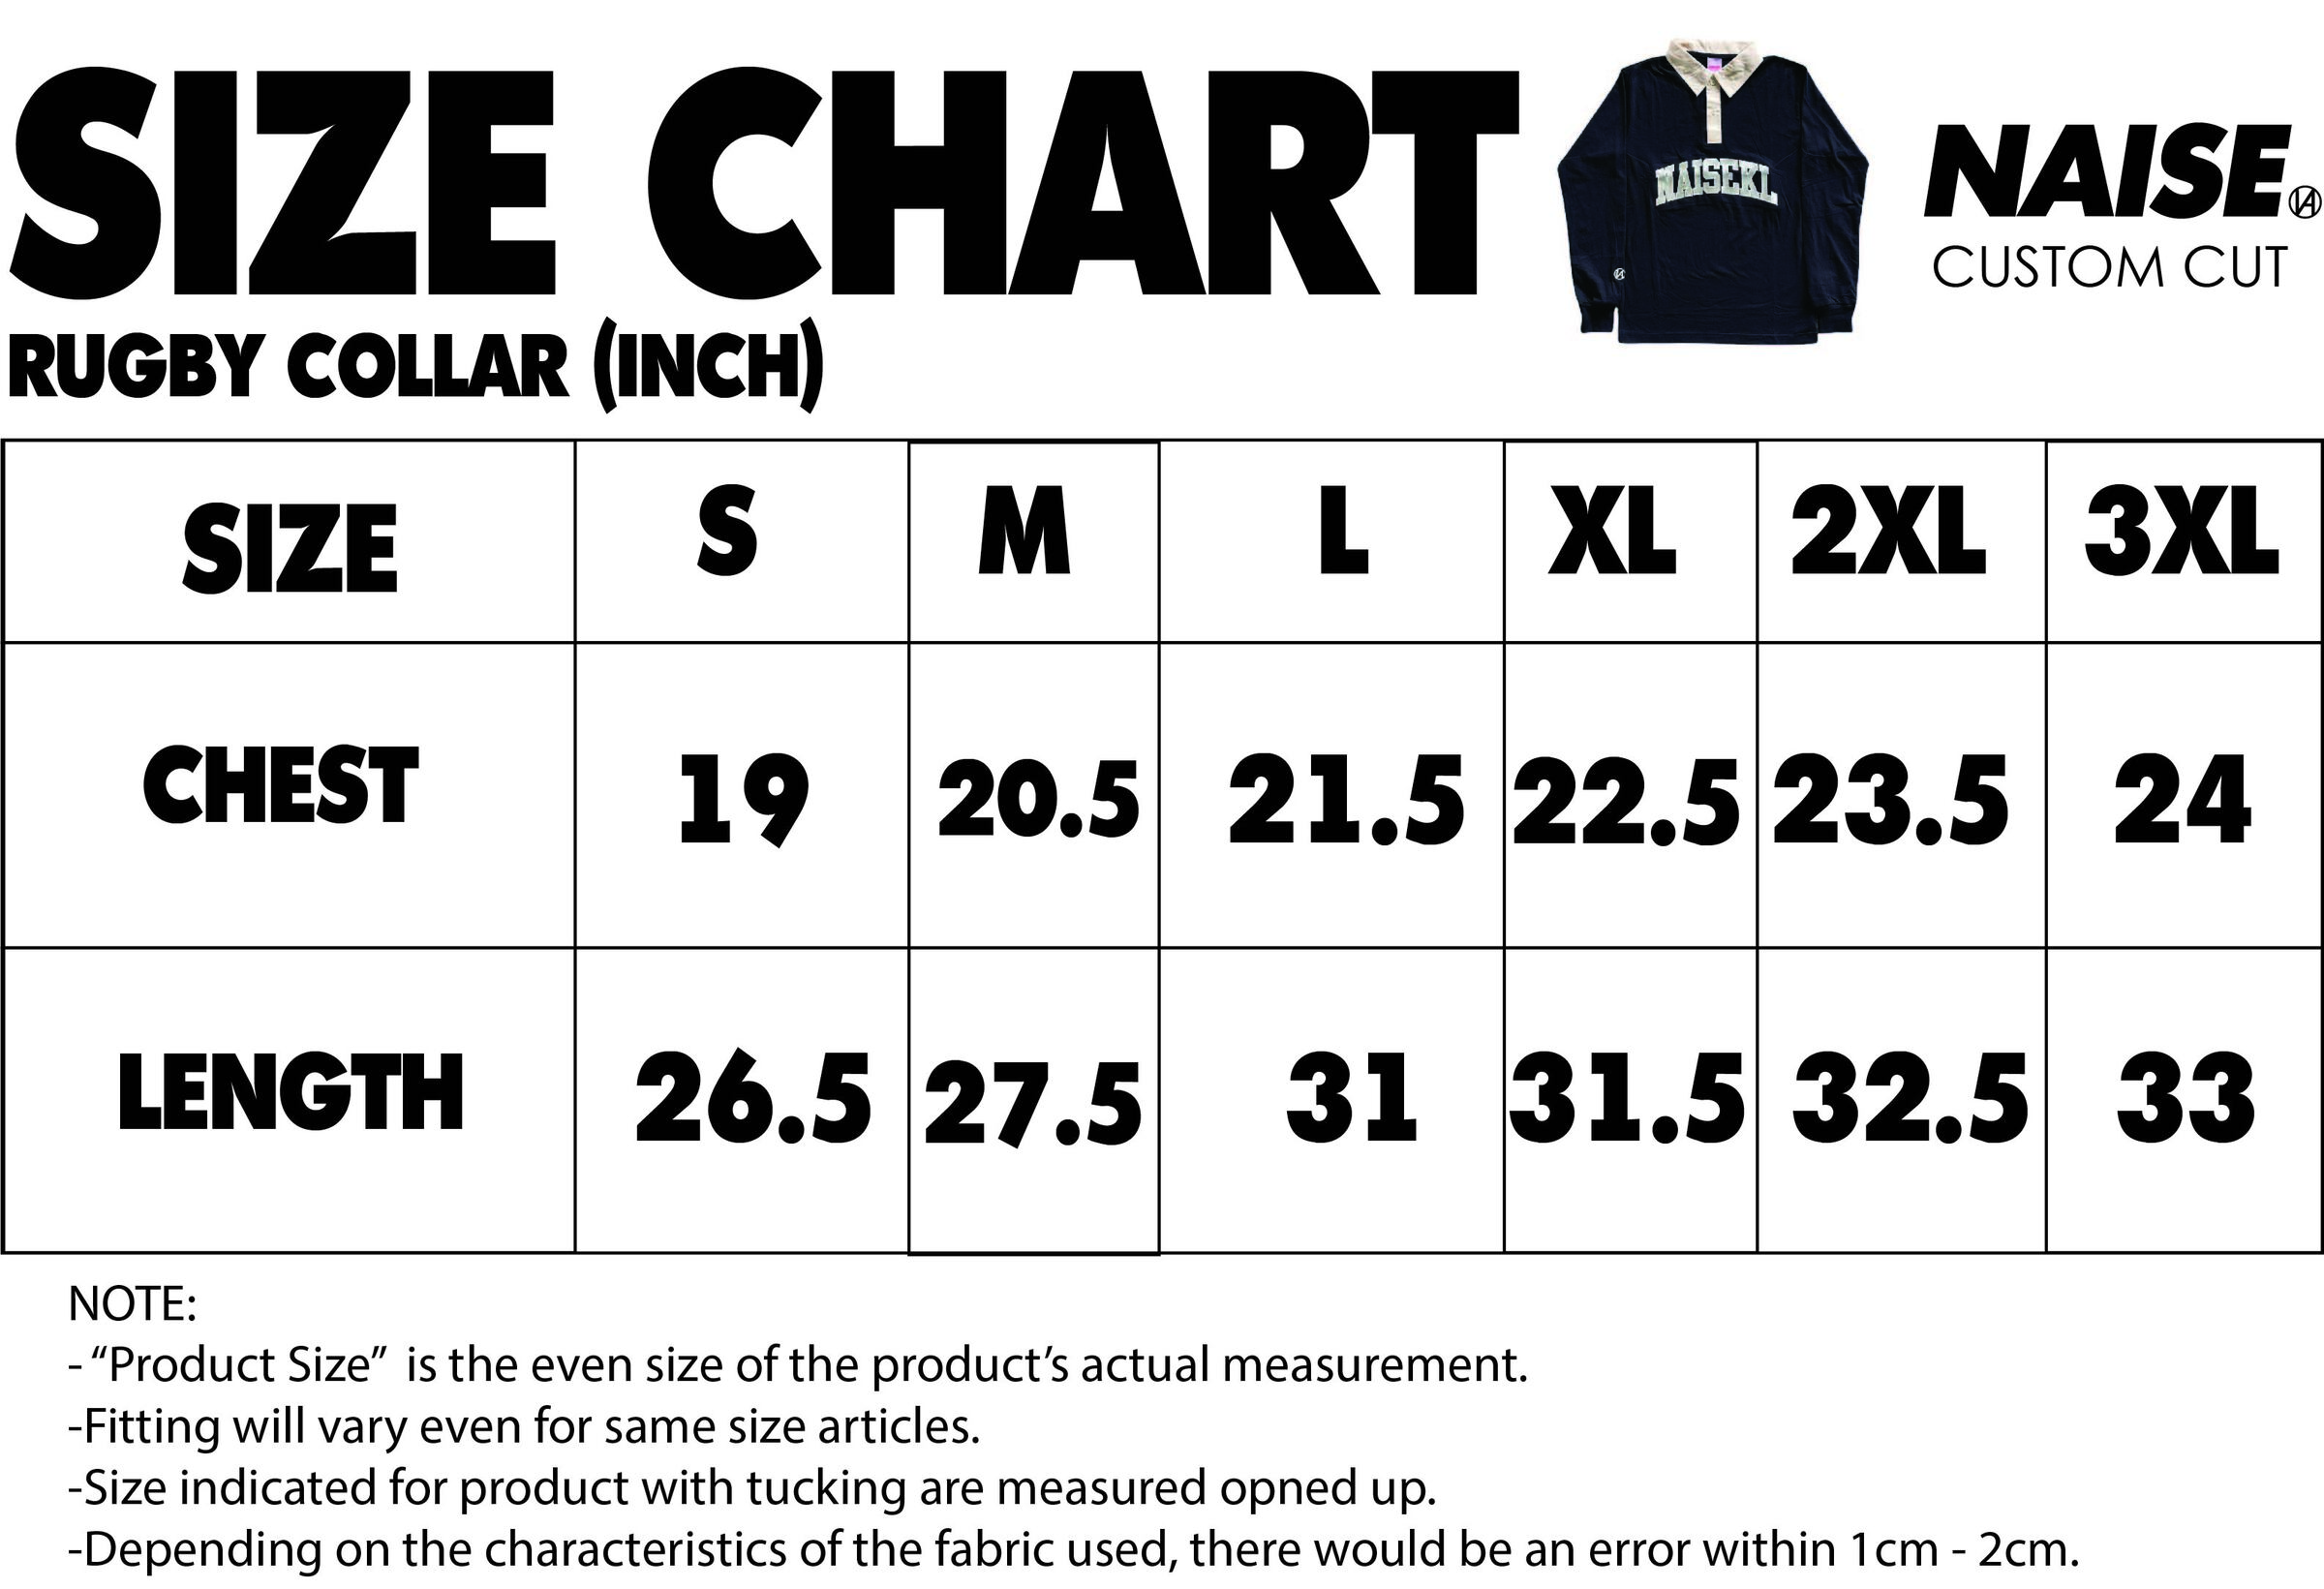 SIZE CHART RUGBY COLLAR 2023 MUQRIE NOTE INCLUDED